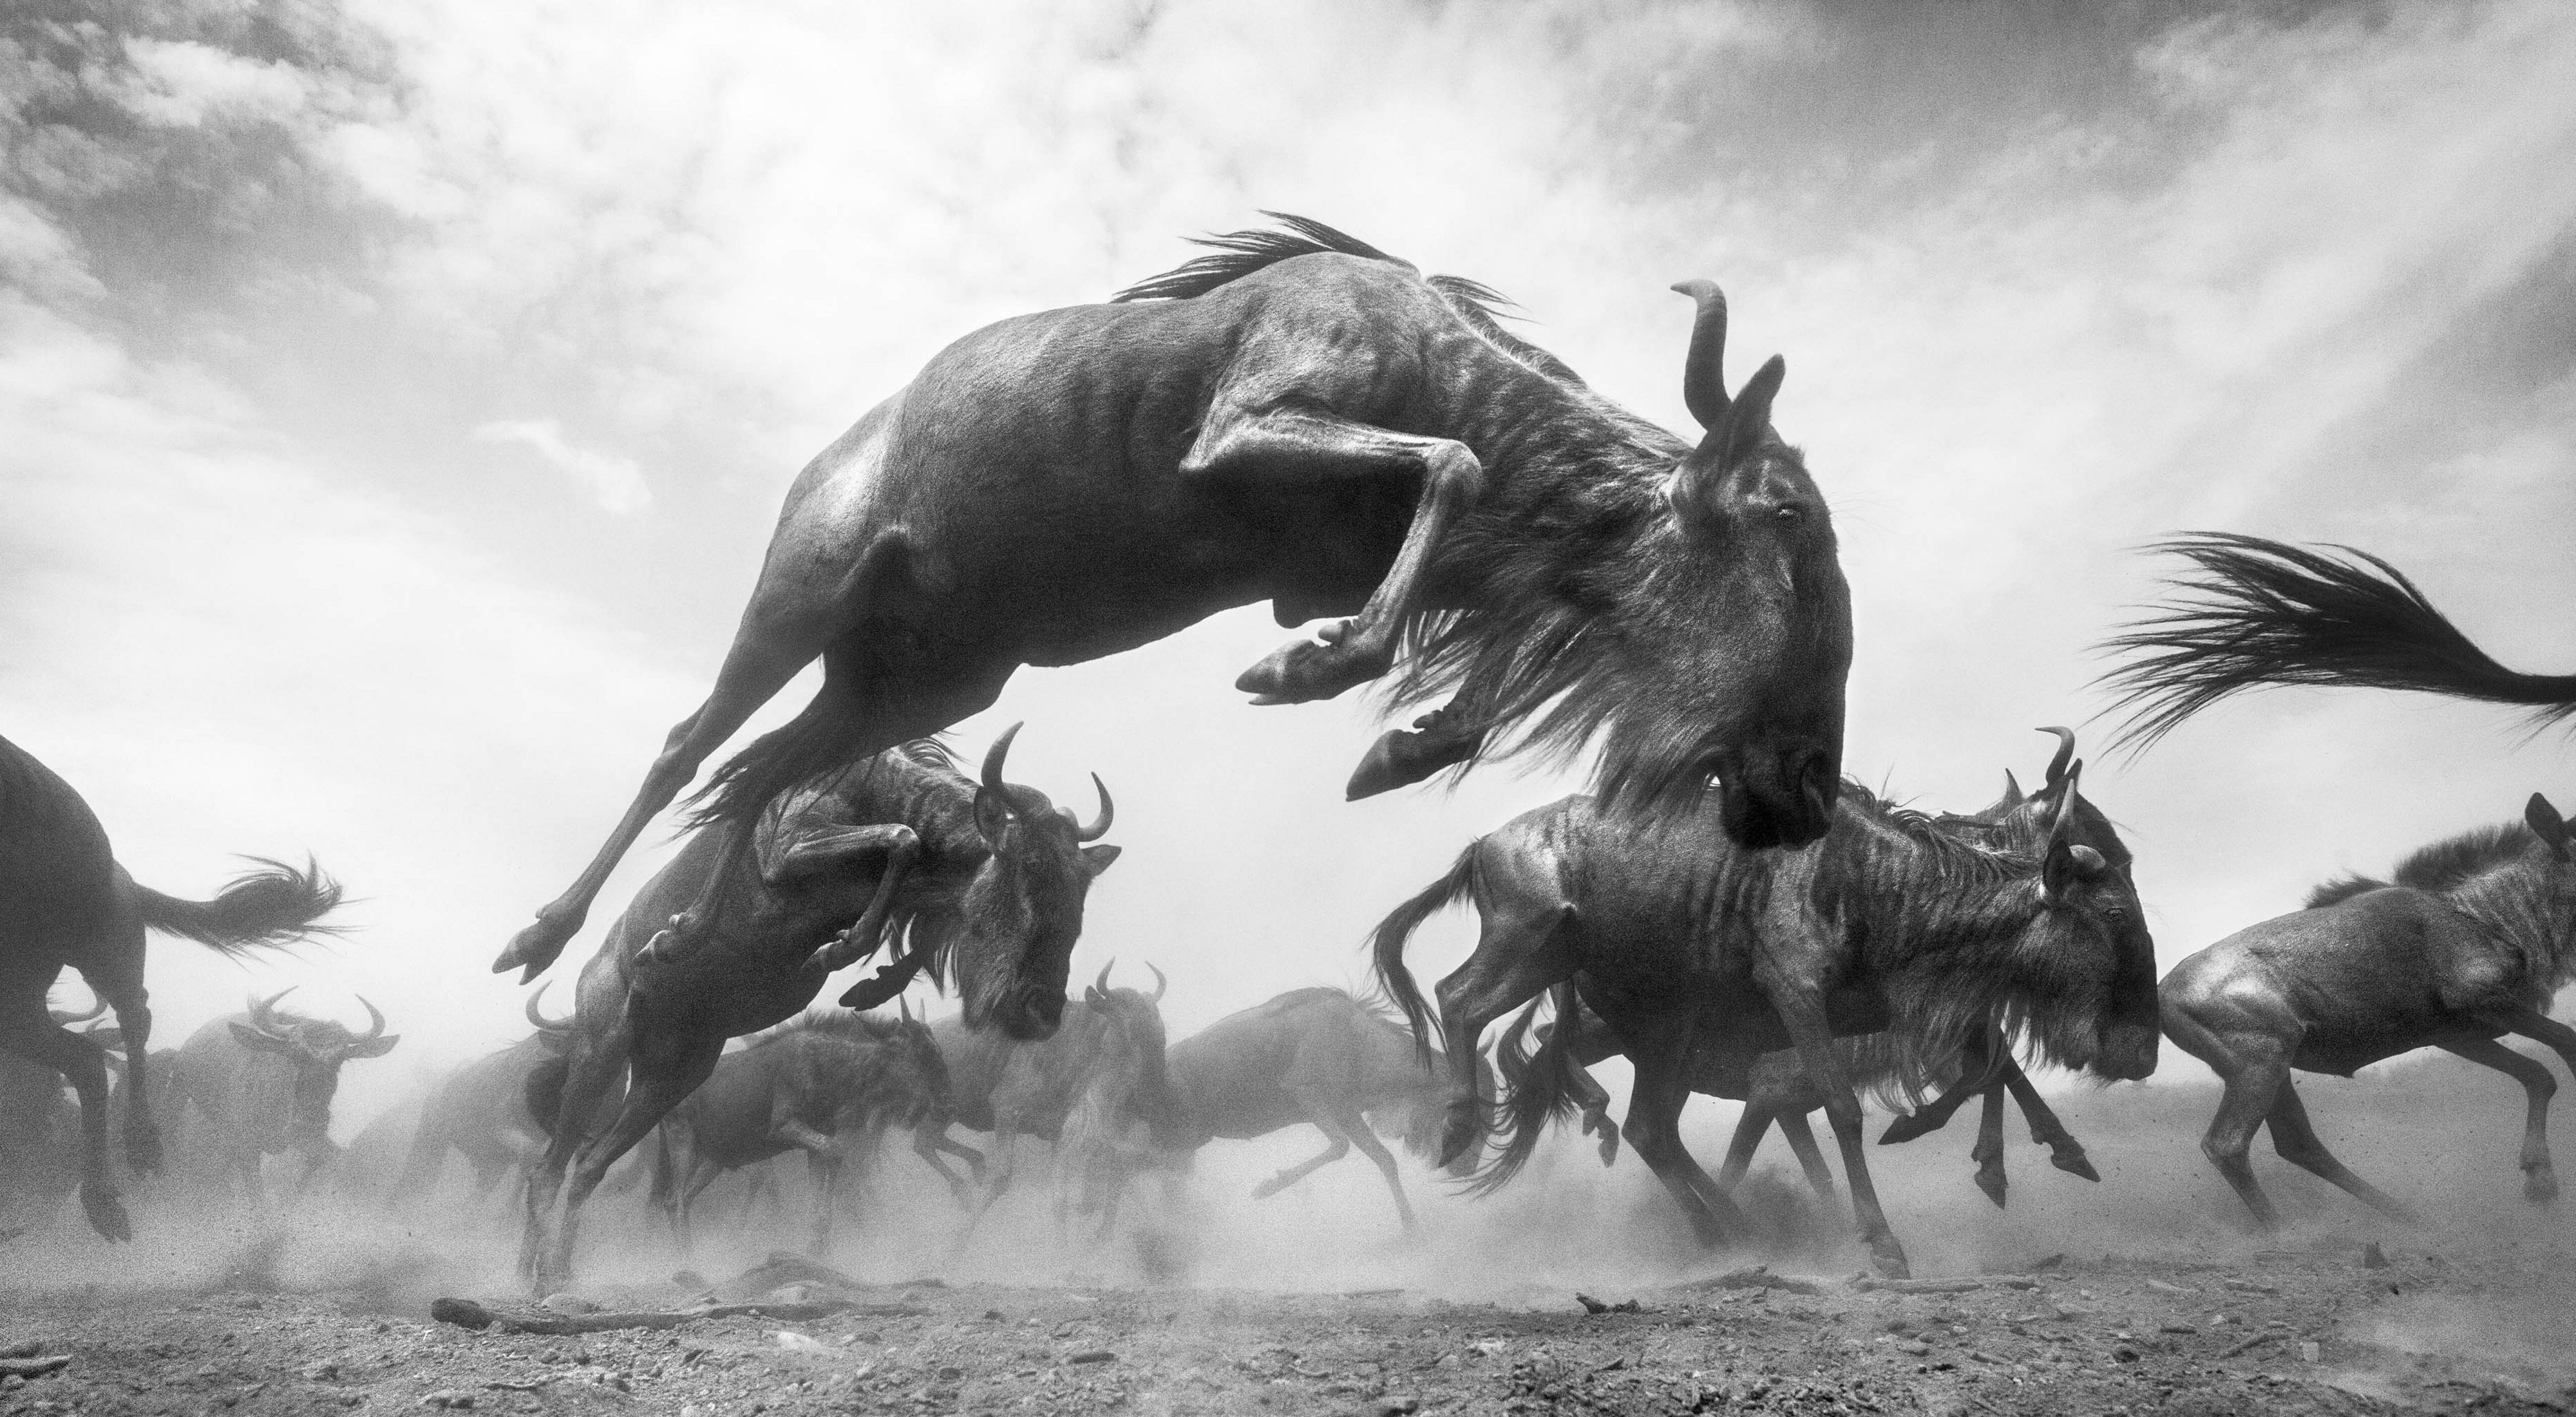 in a black & white image, a wildebeest leaps with many wildebeests in the background